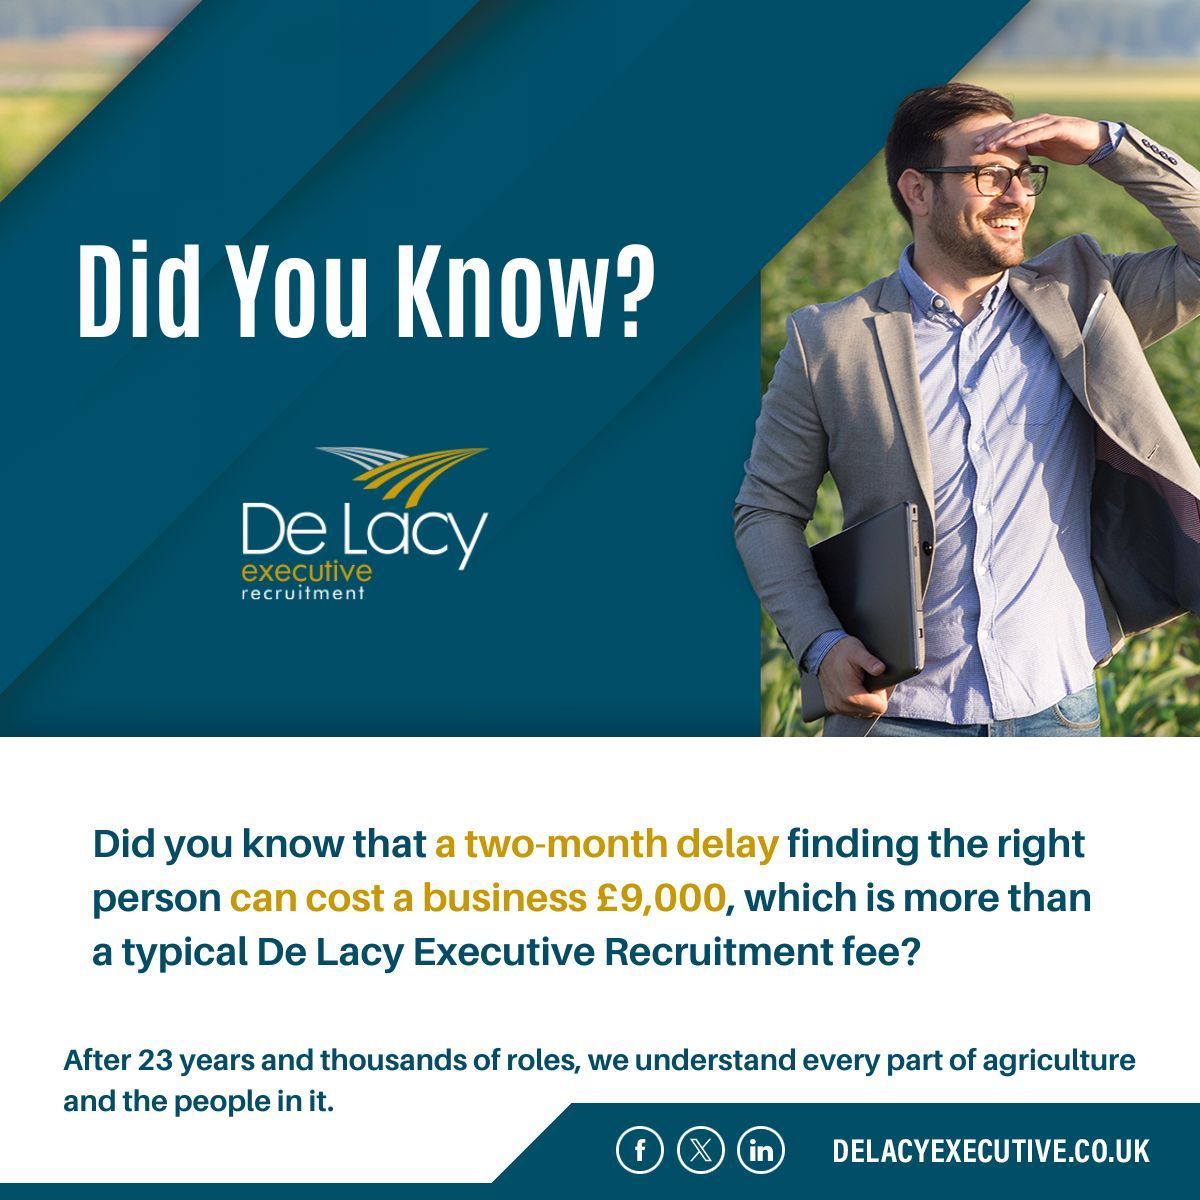 Did you know that a 2-month delay finding the right person can cost a business £9,000, which is more than a typical De Lacy Executive Recruitment fee?

We can help! Contact us:

✉️ admin@delacyexecutive.co.uk
📱 +44 (0)1885 483440
🔗 delacyexecutive.co.uk/employers

#UKJobs #Hiring #UKAg